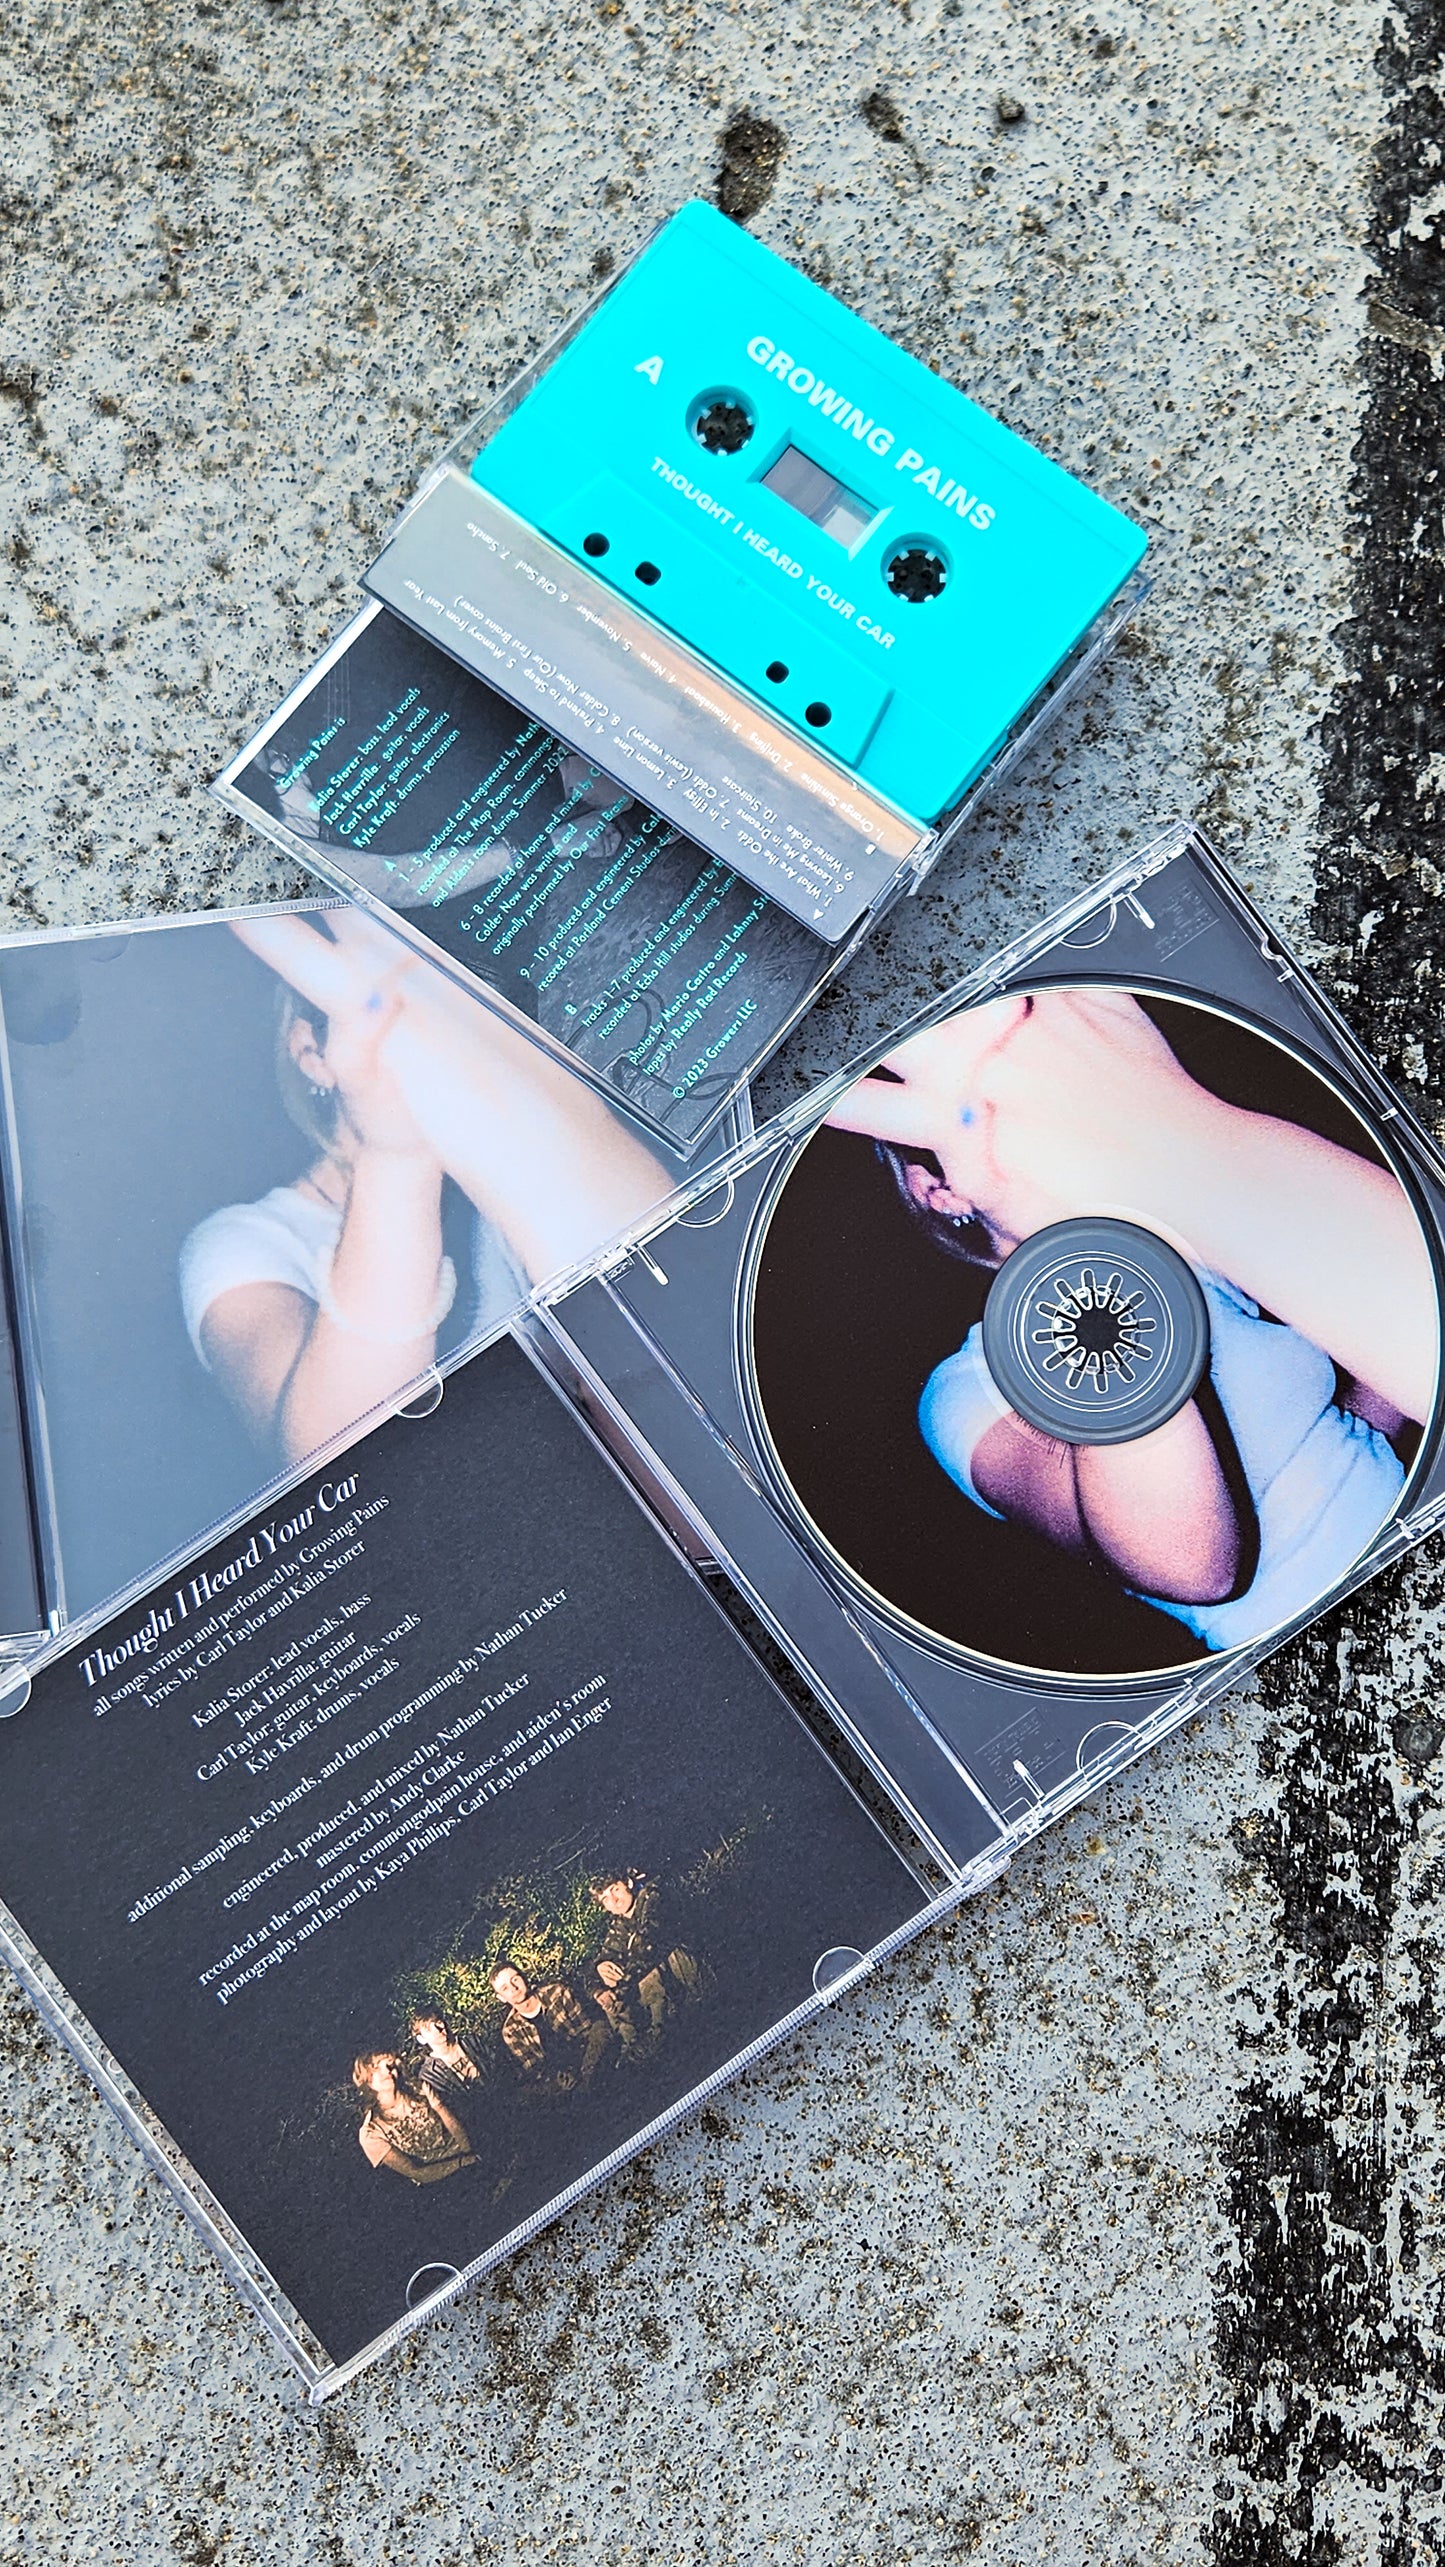 'thought i heard your car' CD + discography cassette bundle